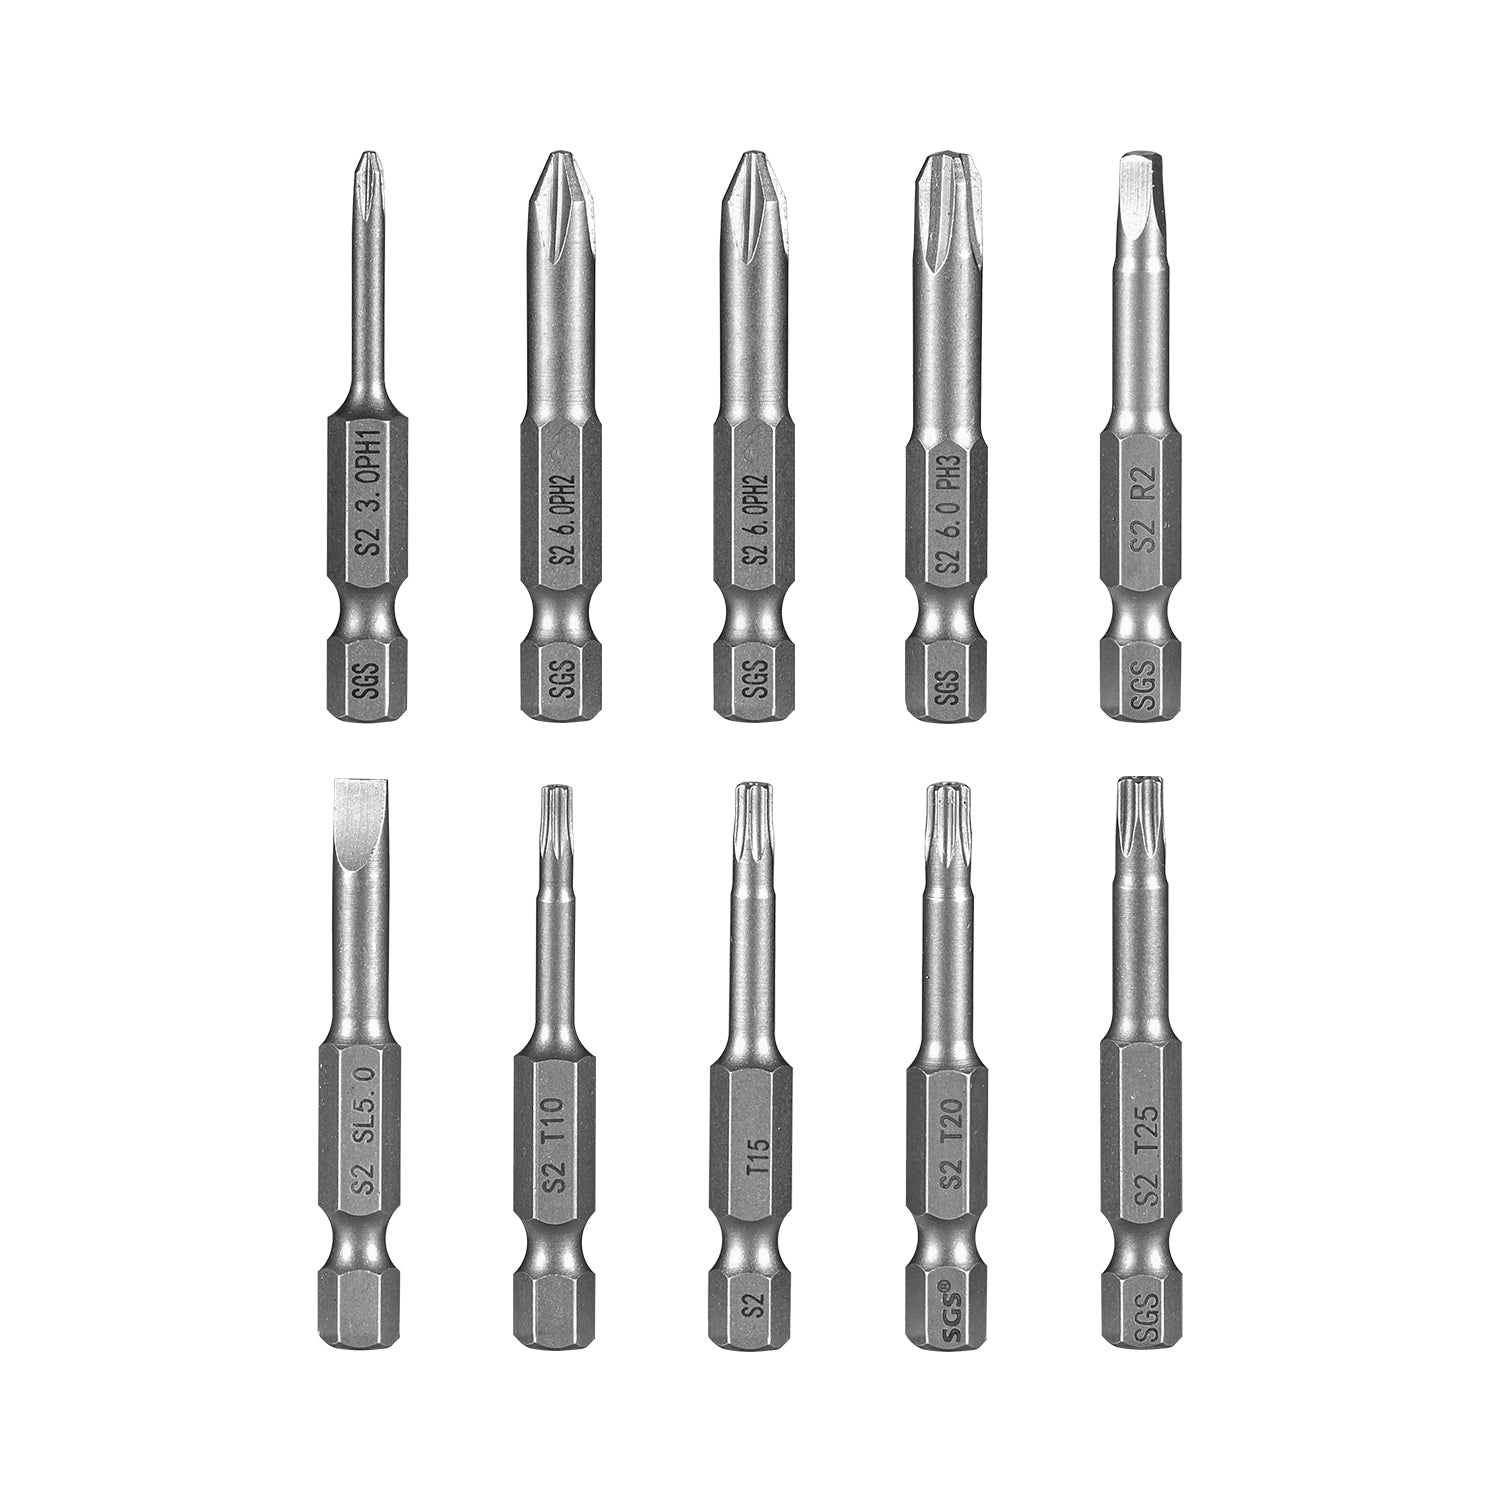 Screwdriver Bit Set, 10 Pcs, S2 Steel, with Free Holder and Case